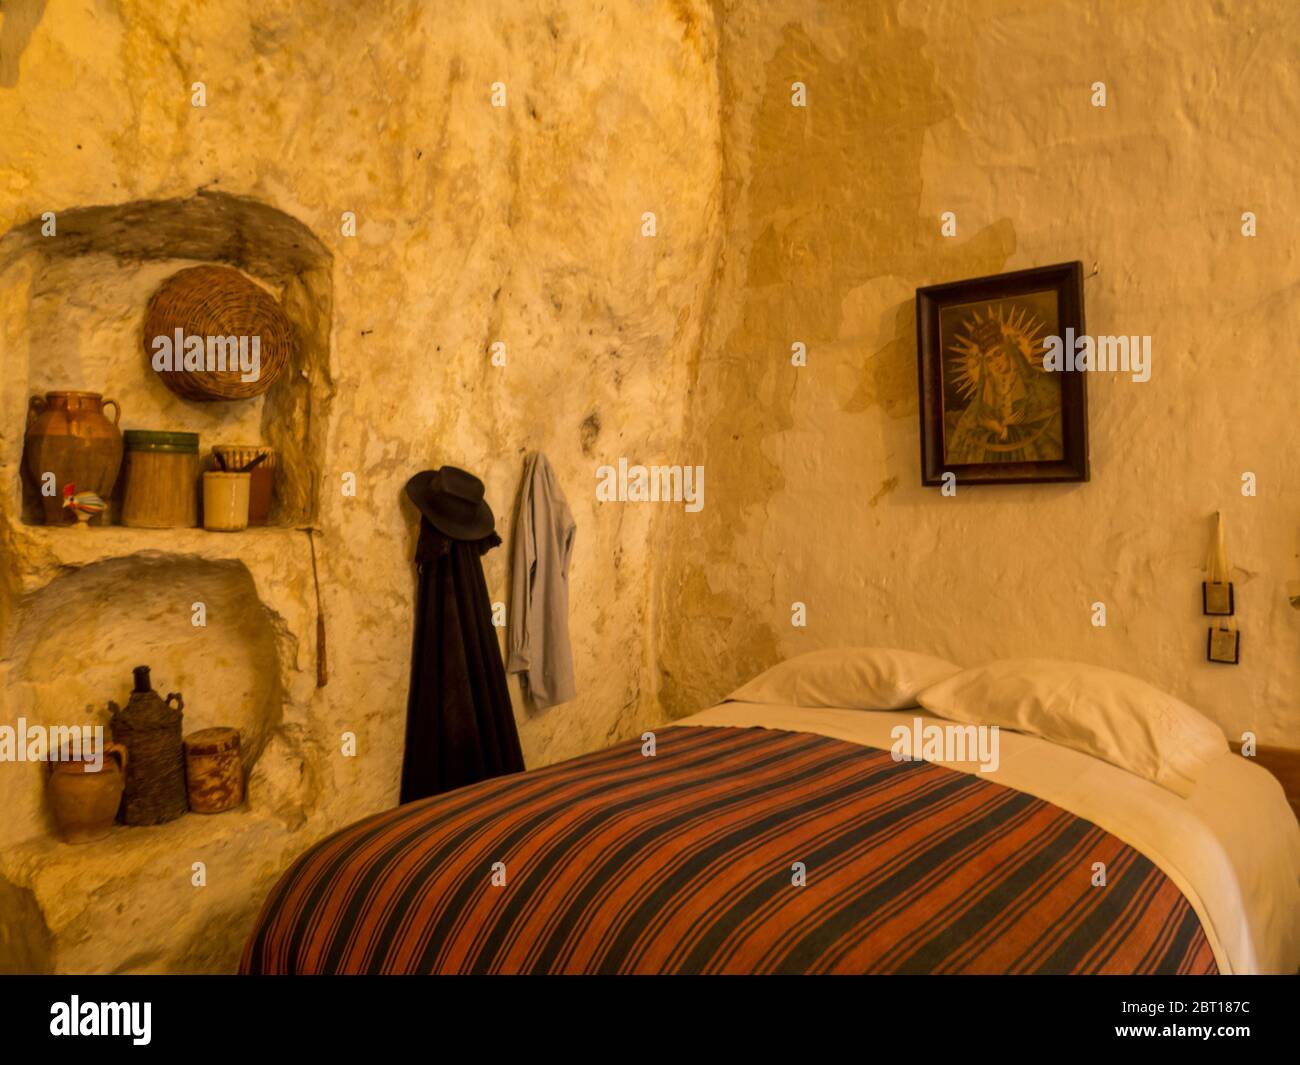 View of the interior of the Historical Home Cave (Italian: Storica Casa Grotta). In Matera, Italy Stock Photo